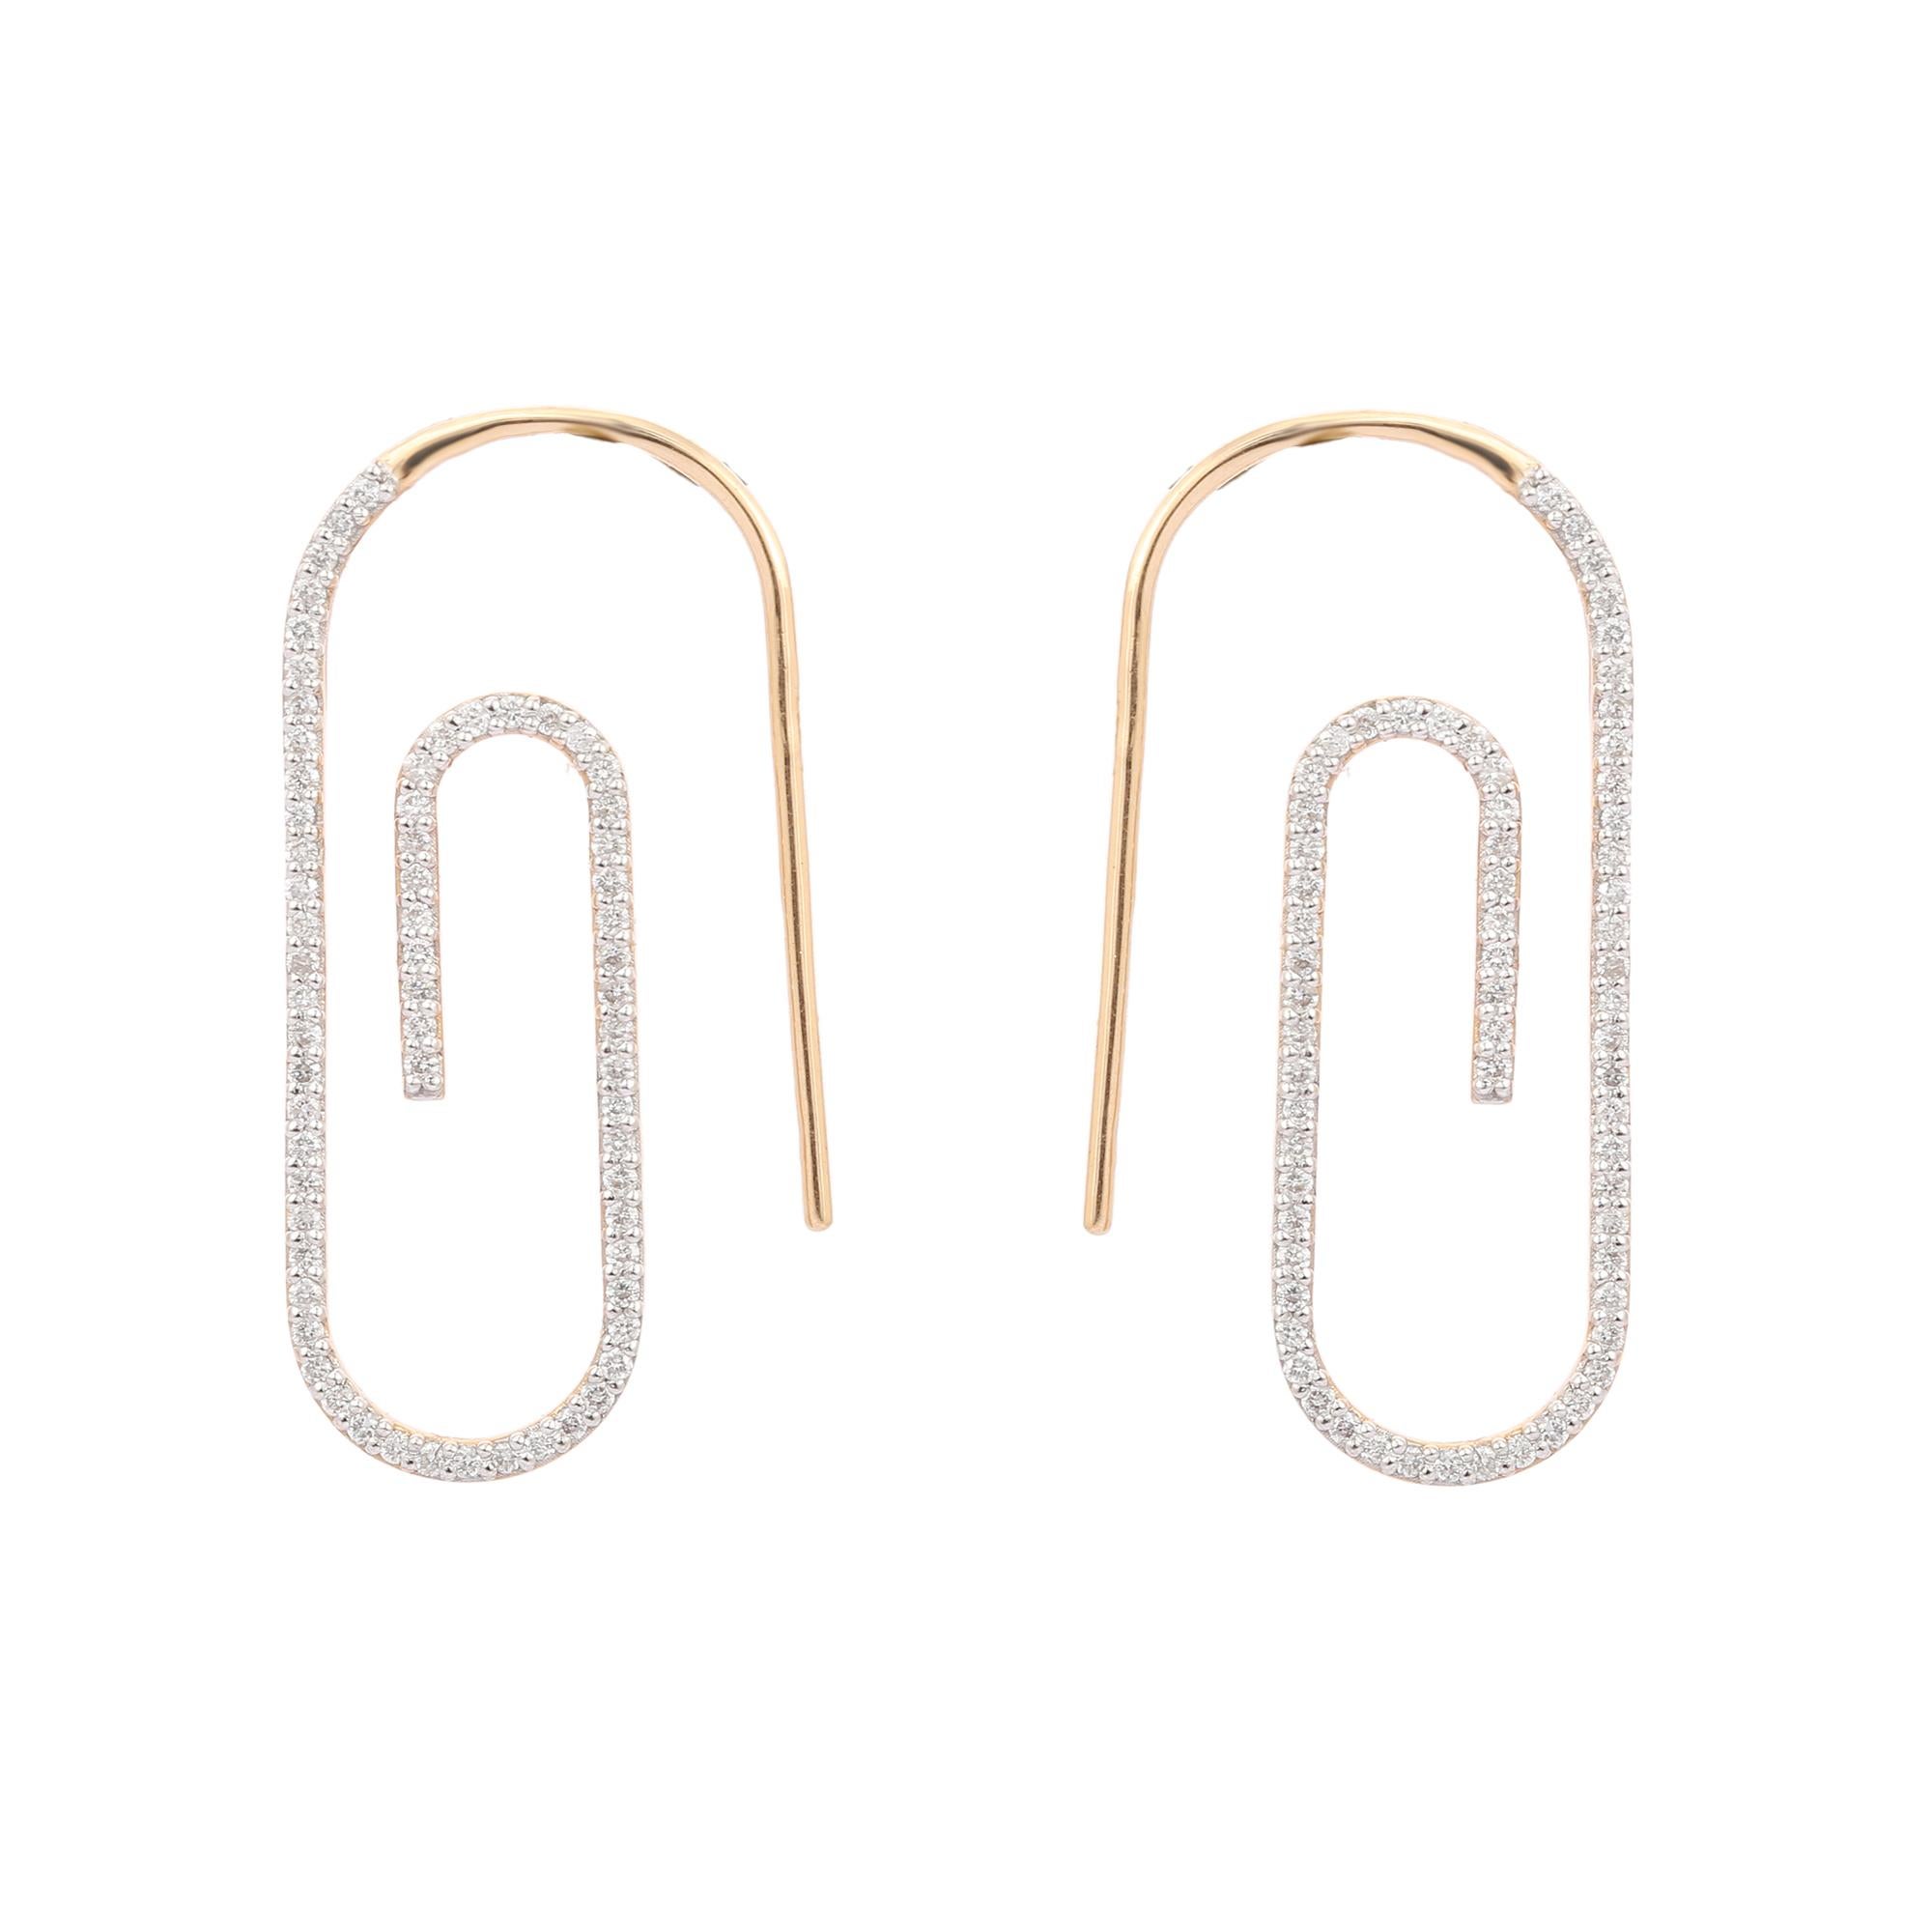 14K Yellow Gold Designer Diamond Hoop Earrings create a subtle beauty while showcasing the colors of the natural diamonds. Light Weighted Diamond Earrings for Complete your designer look. 
Round cut diamonds in 14K gold. Embrace your look with these